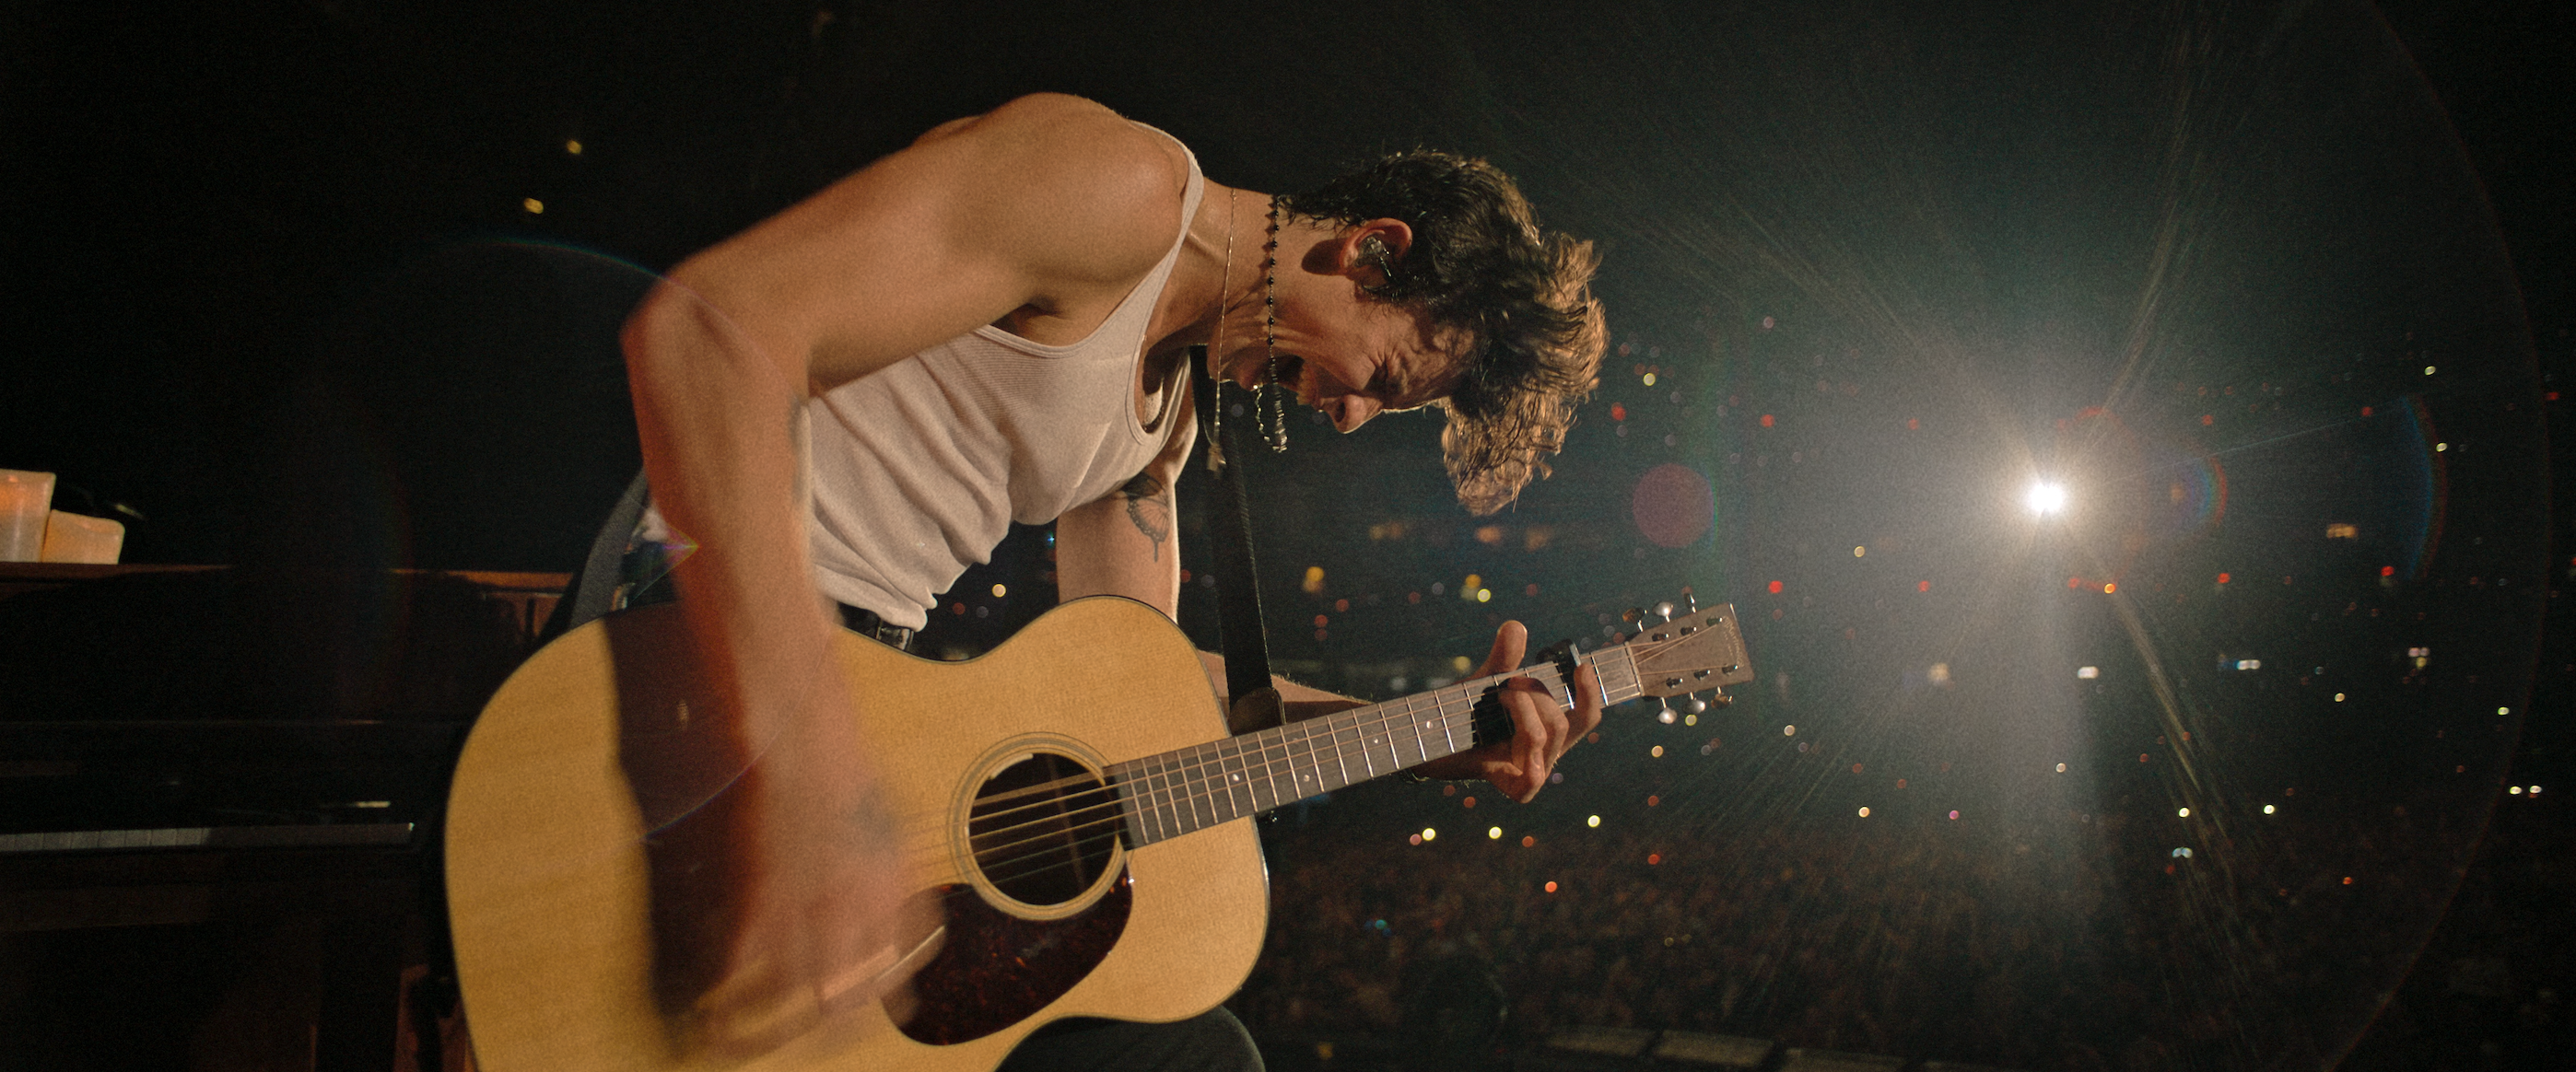 Shawn Mendes in Shawn Mendes: Live in Concert. Photo courtesy of Netflix. | 7 New Rules to Celebrate Christmas According to Netflix | The Little Binger